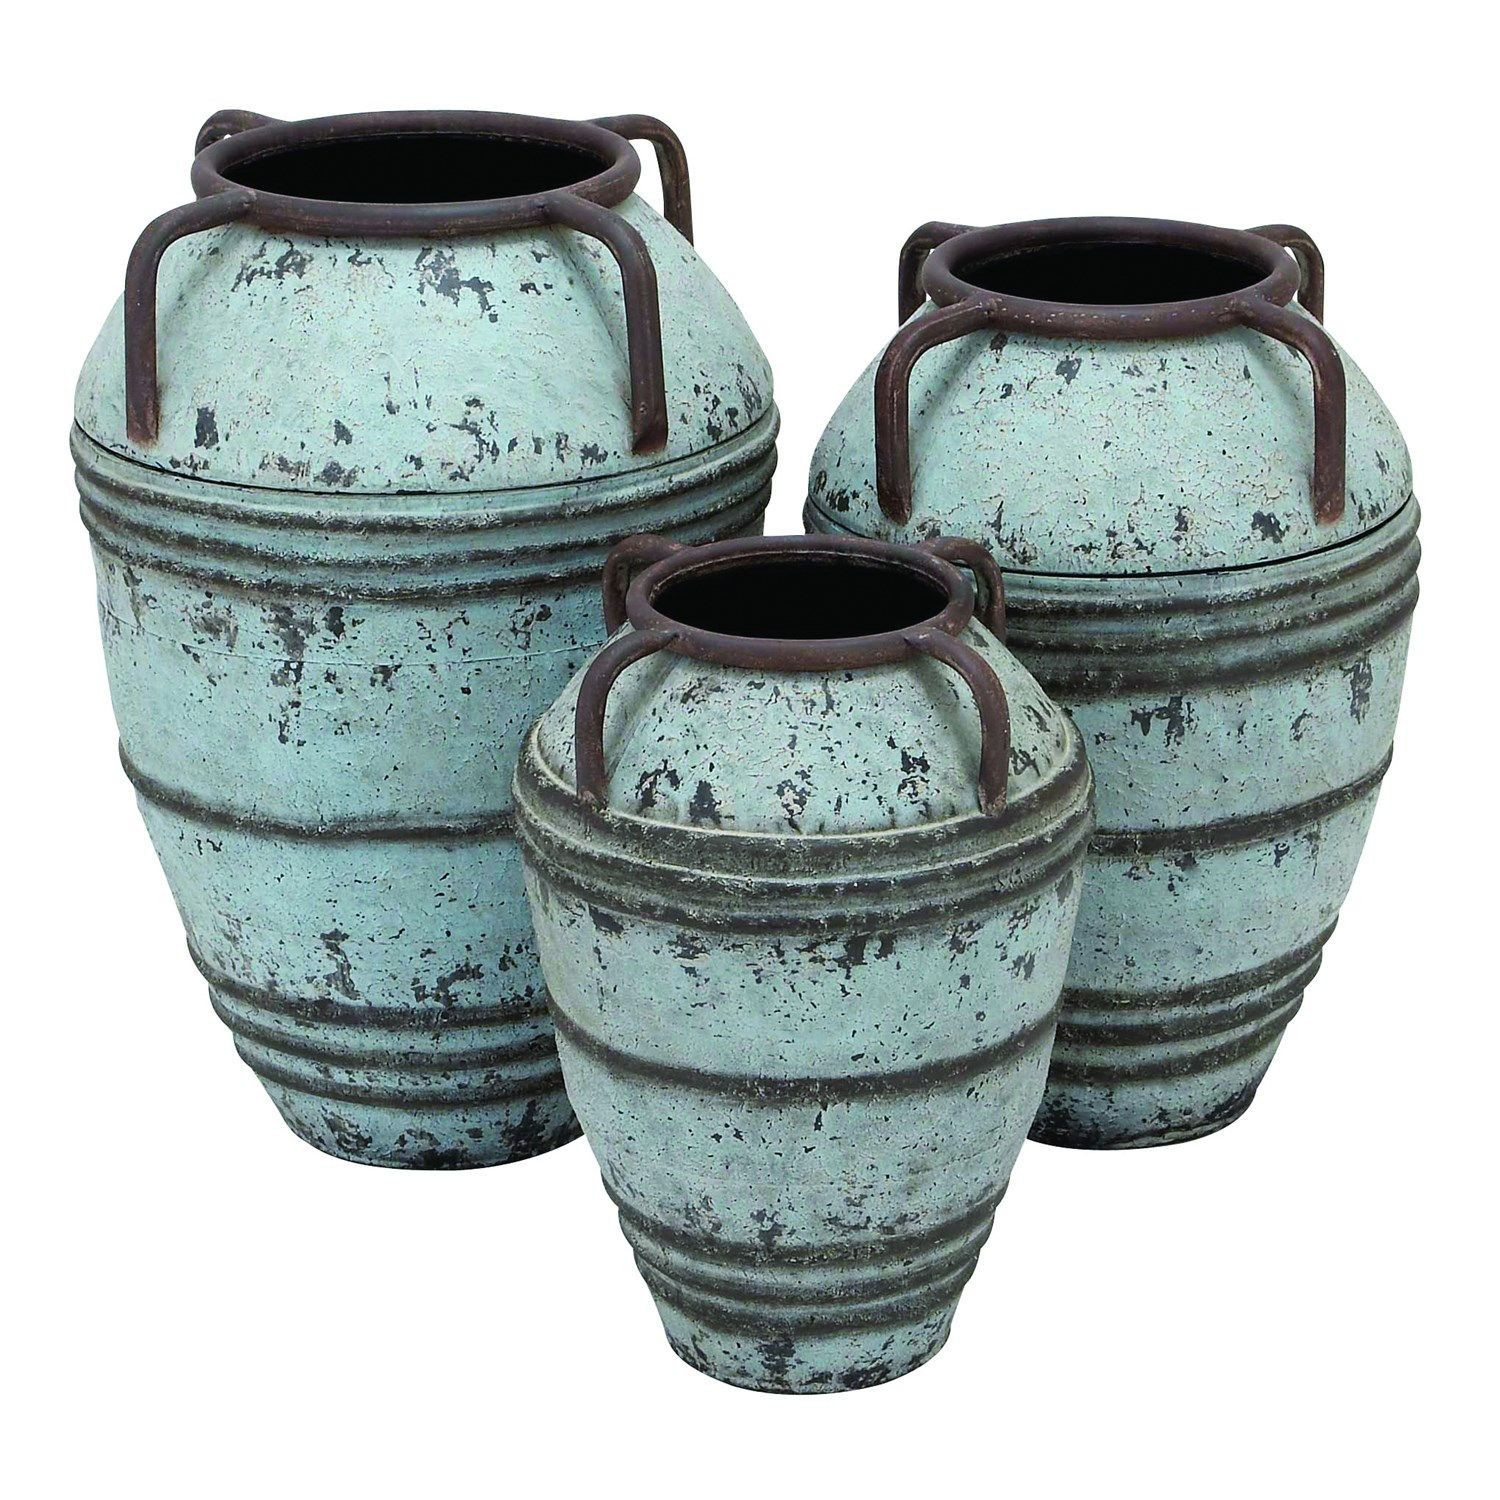 bamboo vases online india of woodland imports 20221 metal vase with exemplified finesse set of regarding woodland imports 20221 metal vase with exemplified finesse set of 3